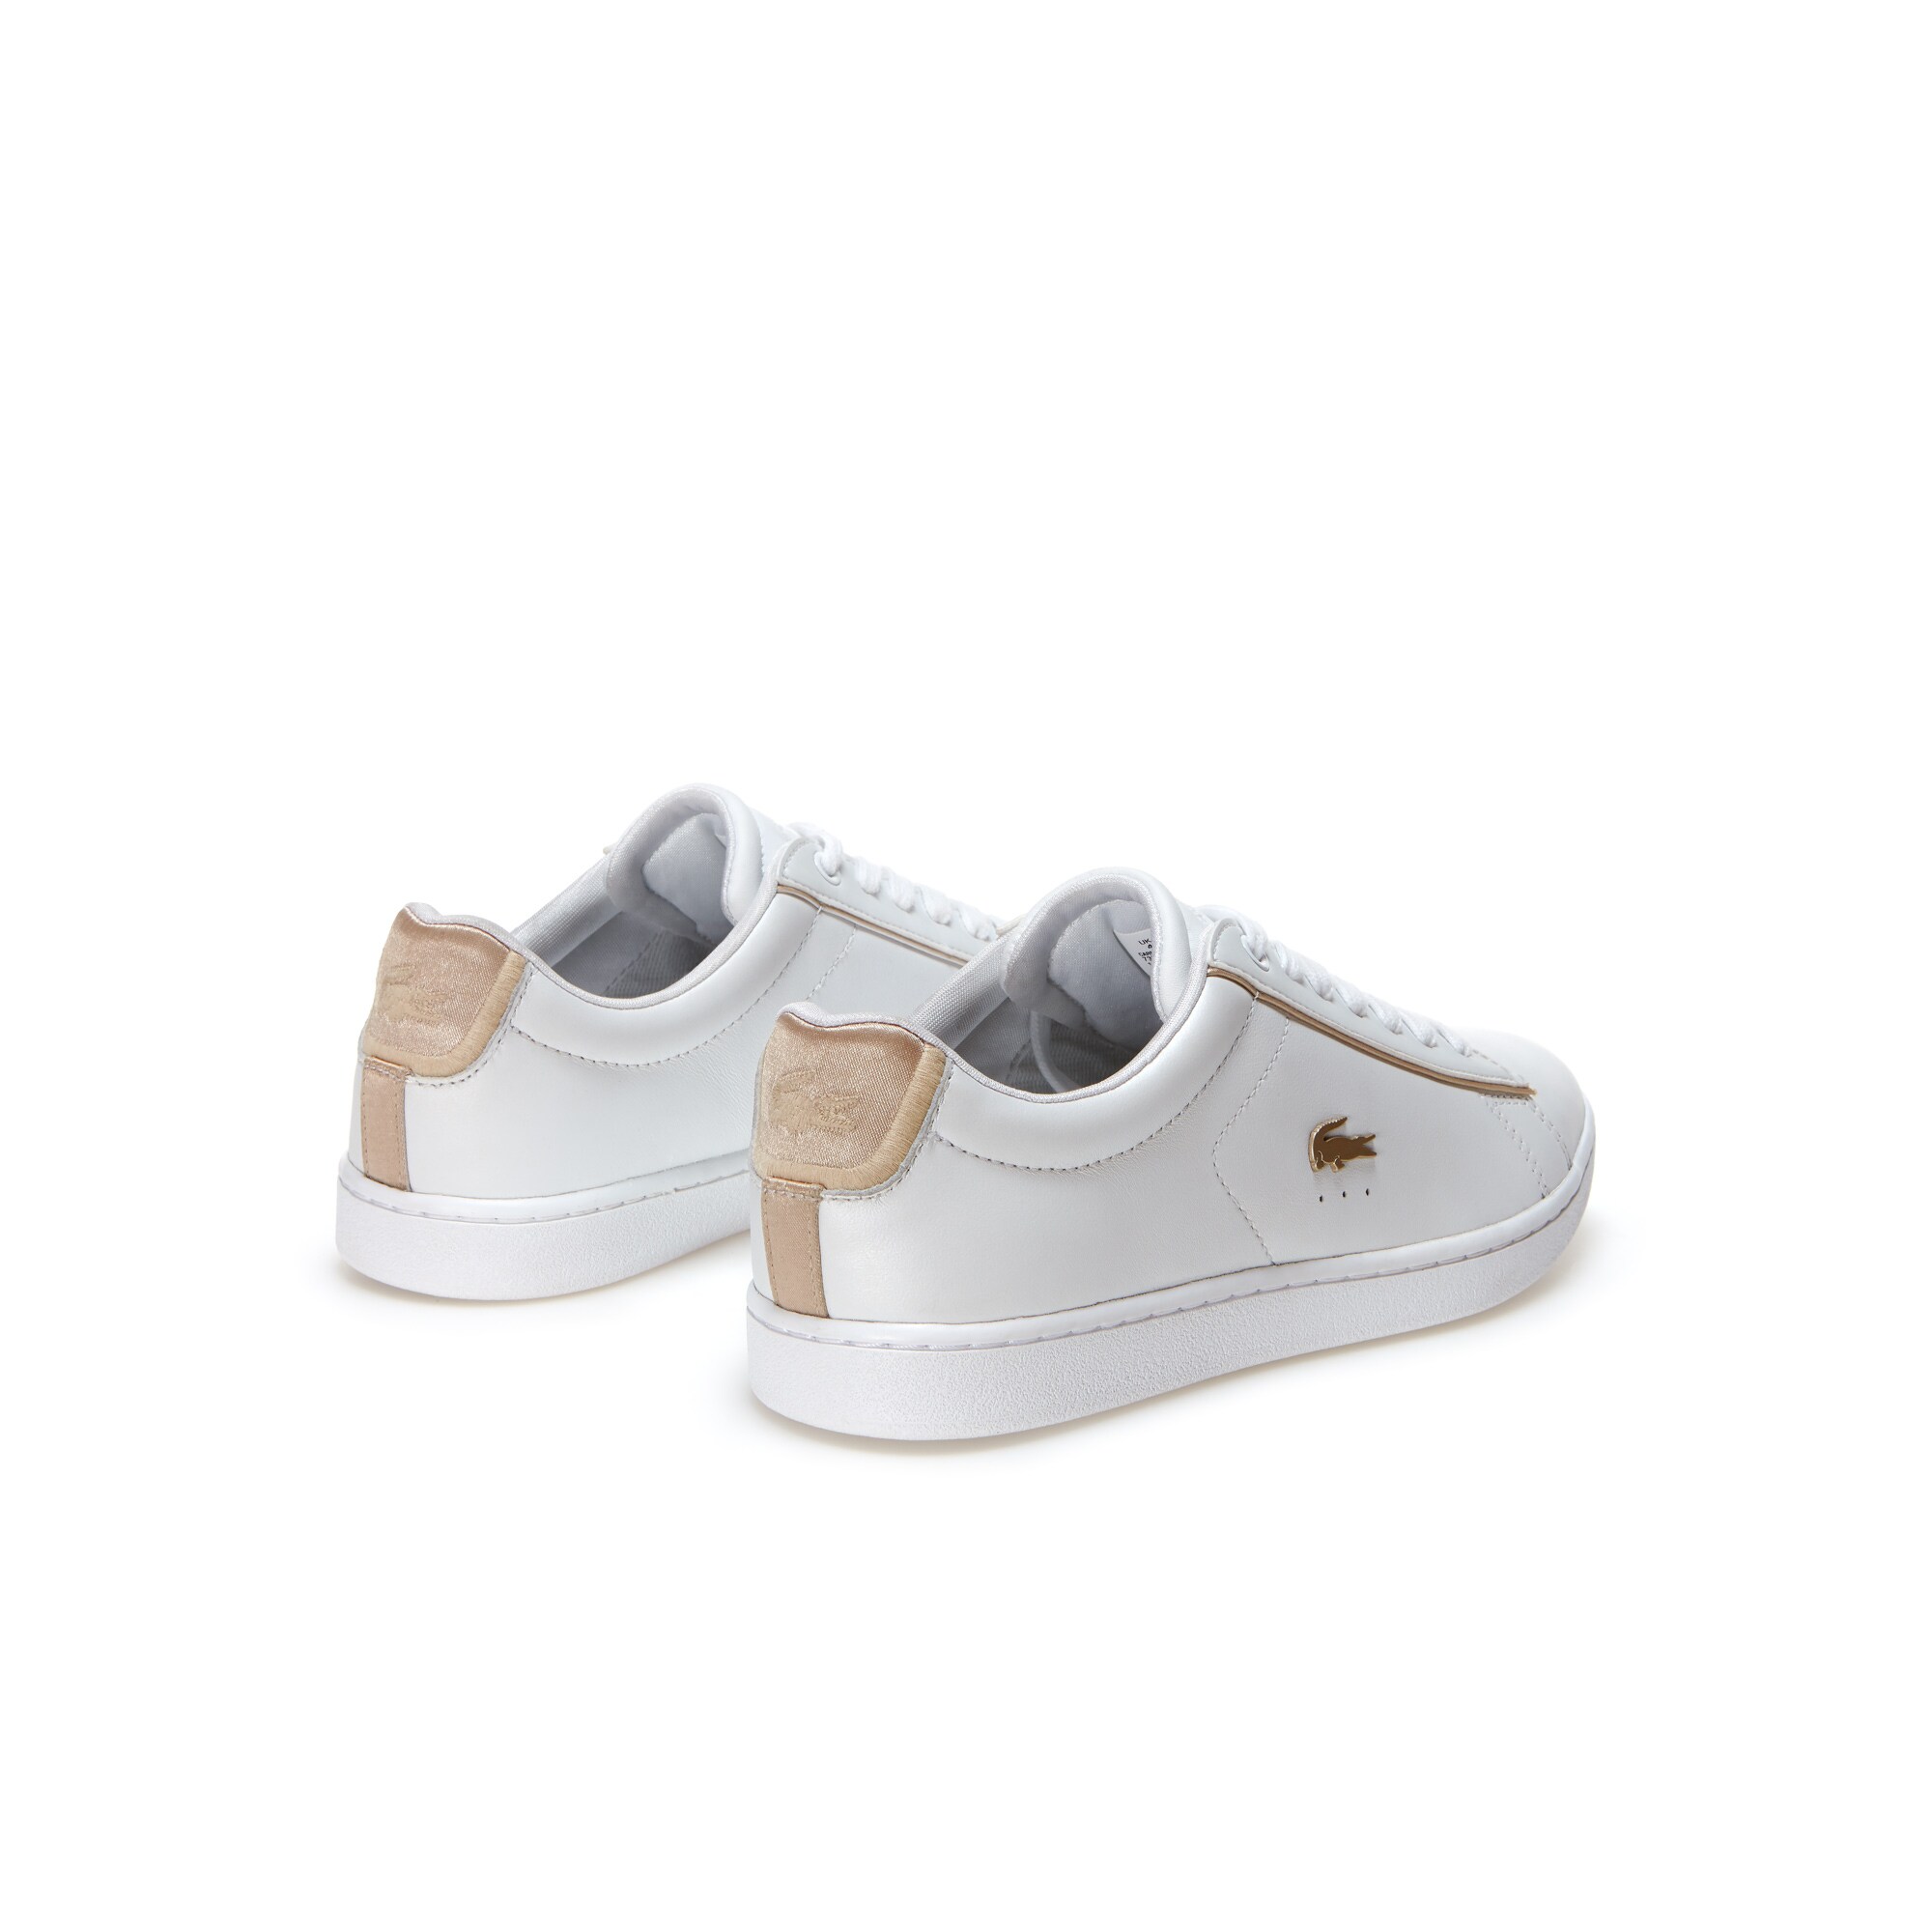 lacoste carnaby evo 118 6 spw white gold